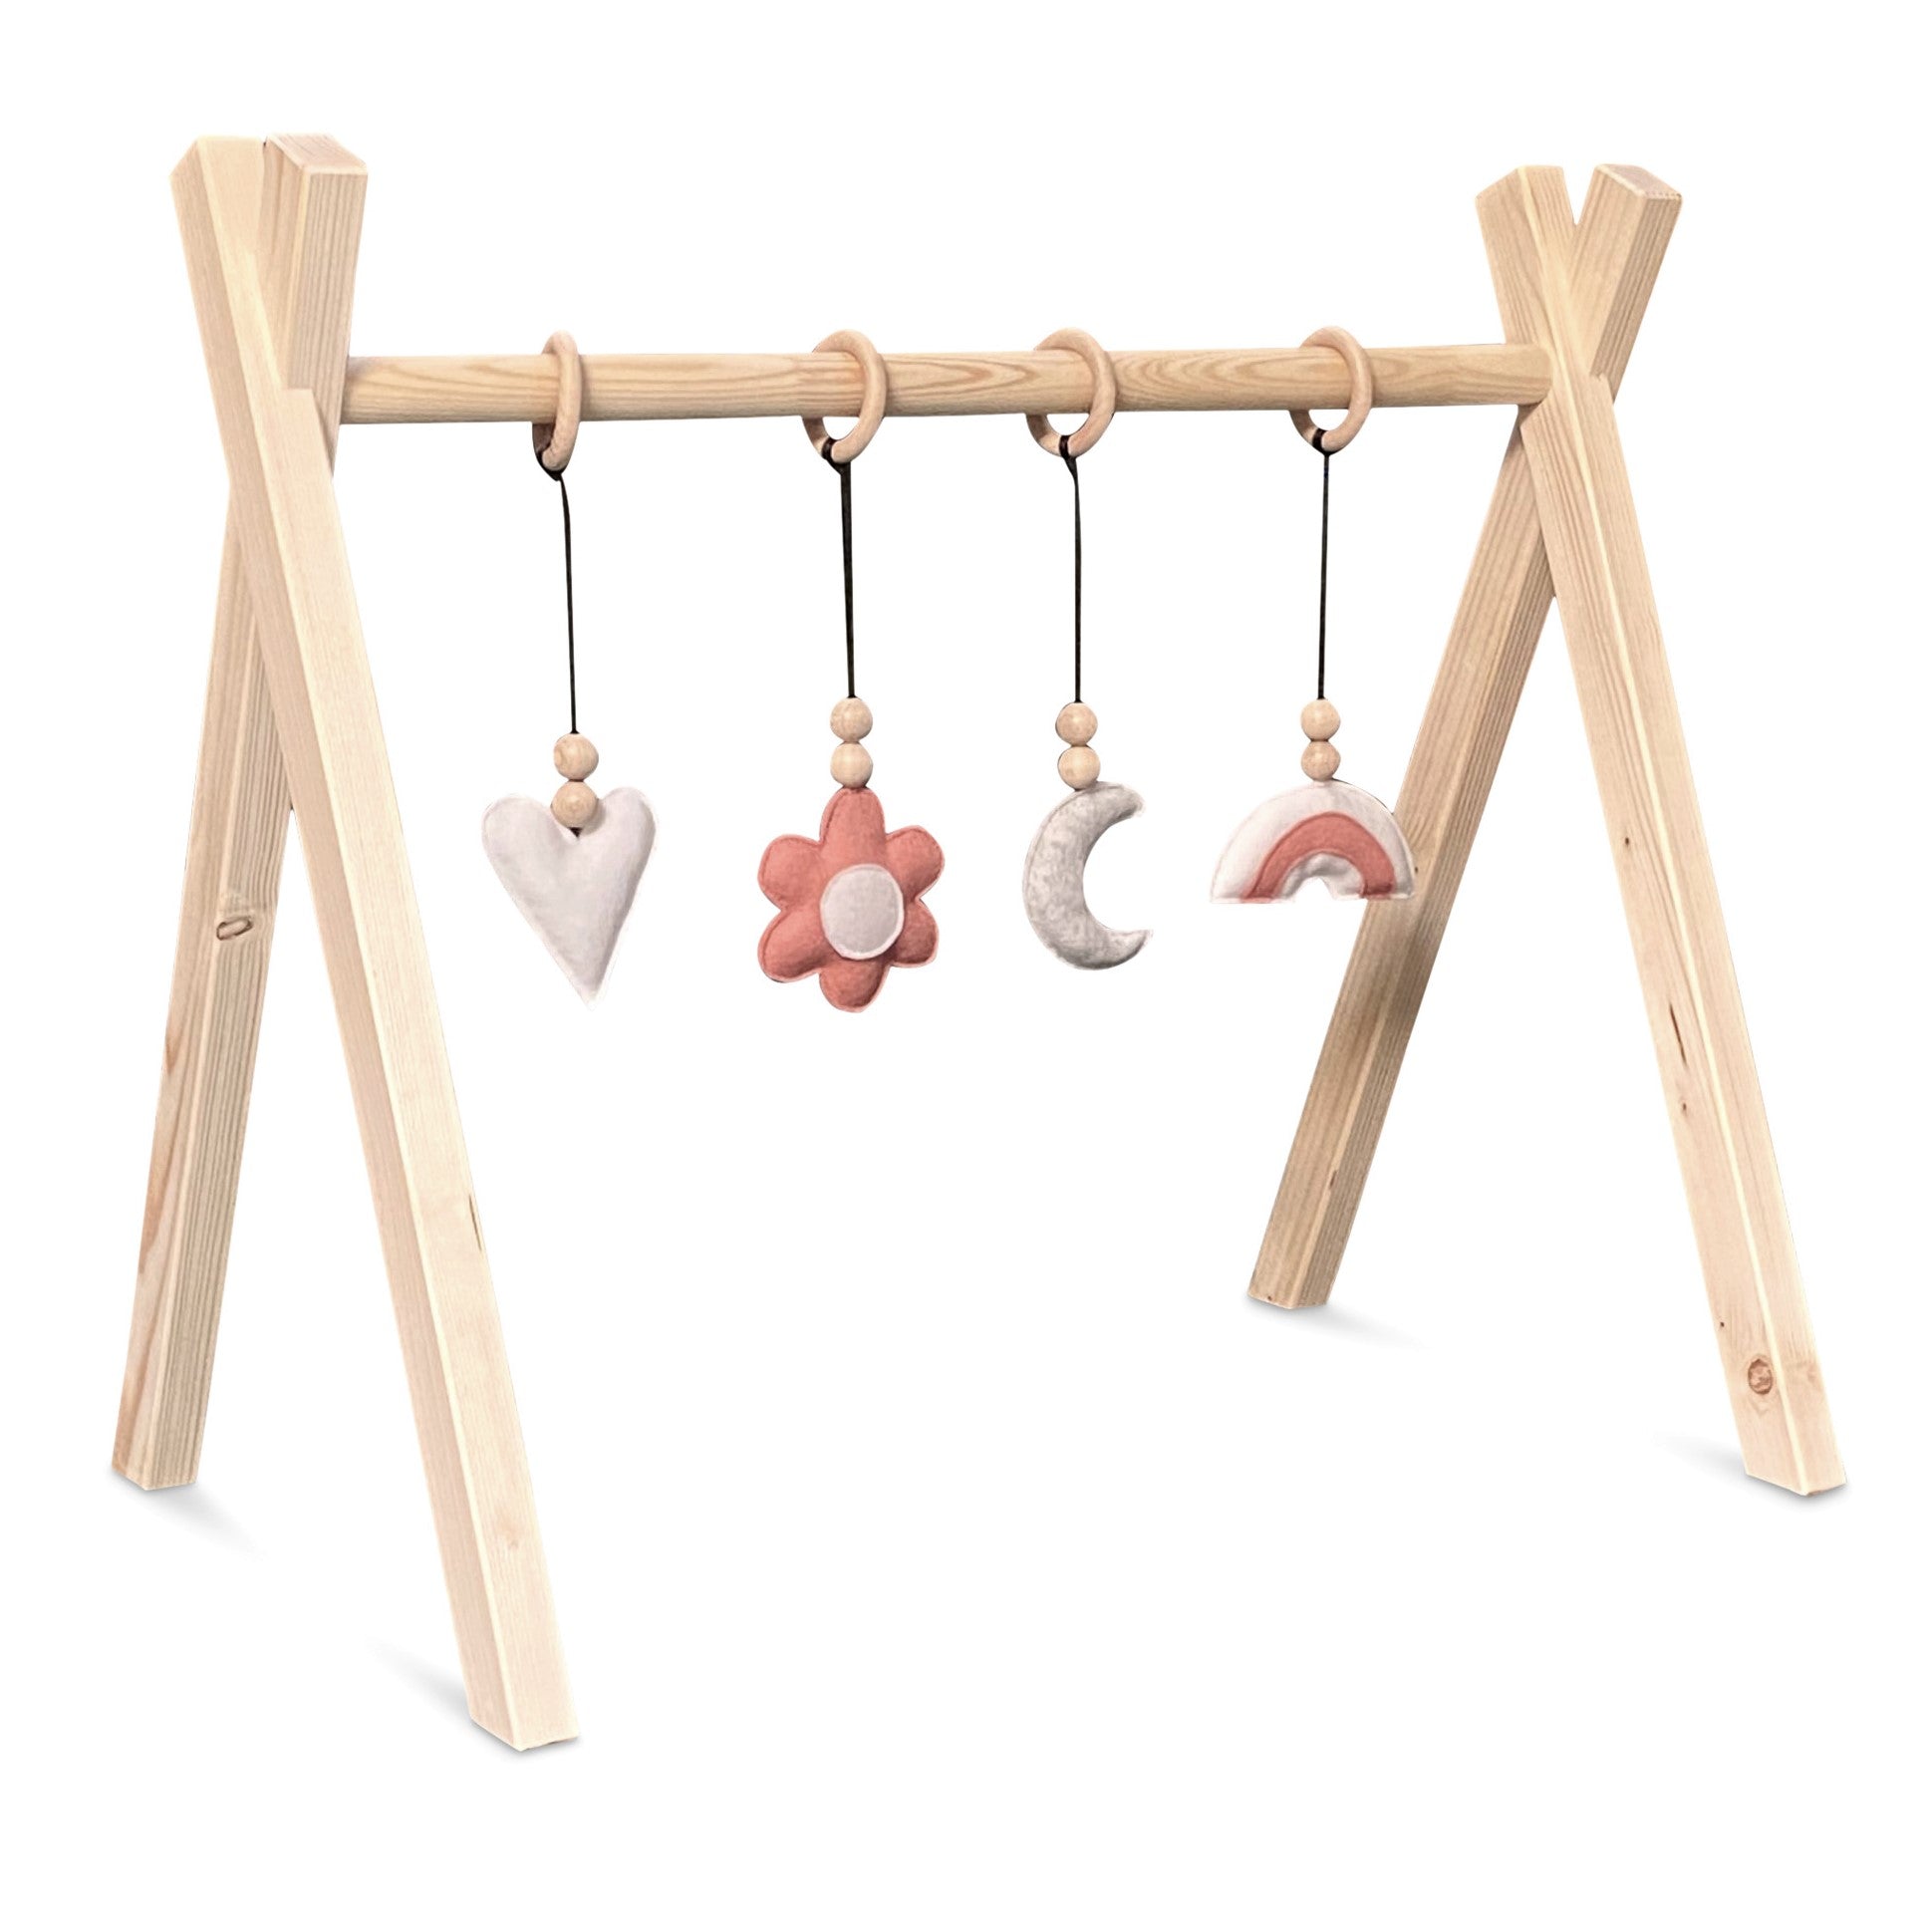 Wooden baby gym, with flower and rainbow felt hangers - toddie.com